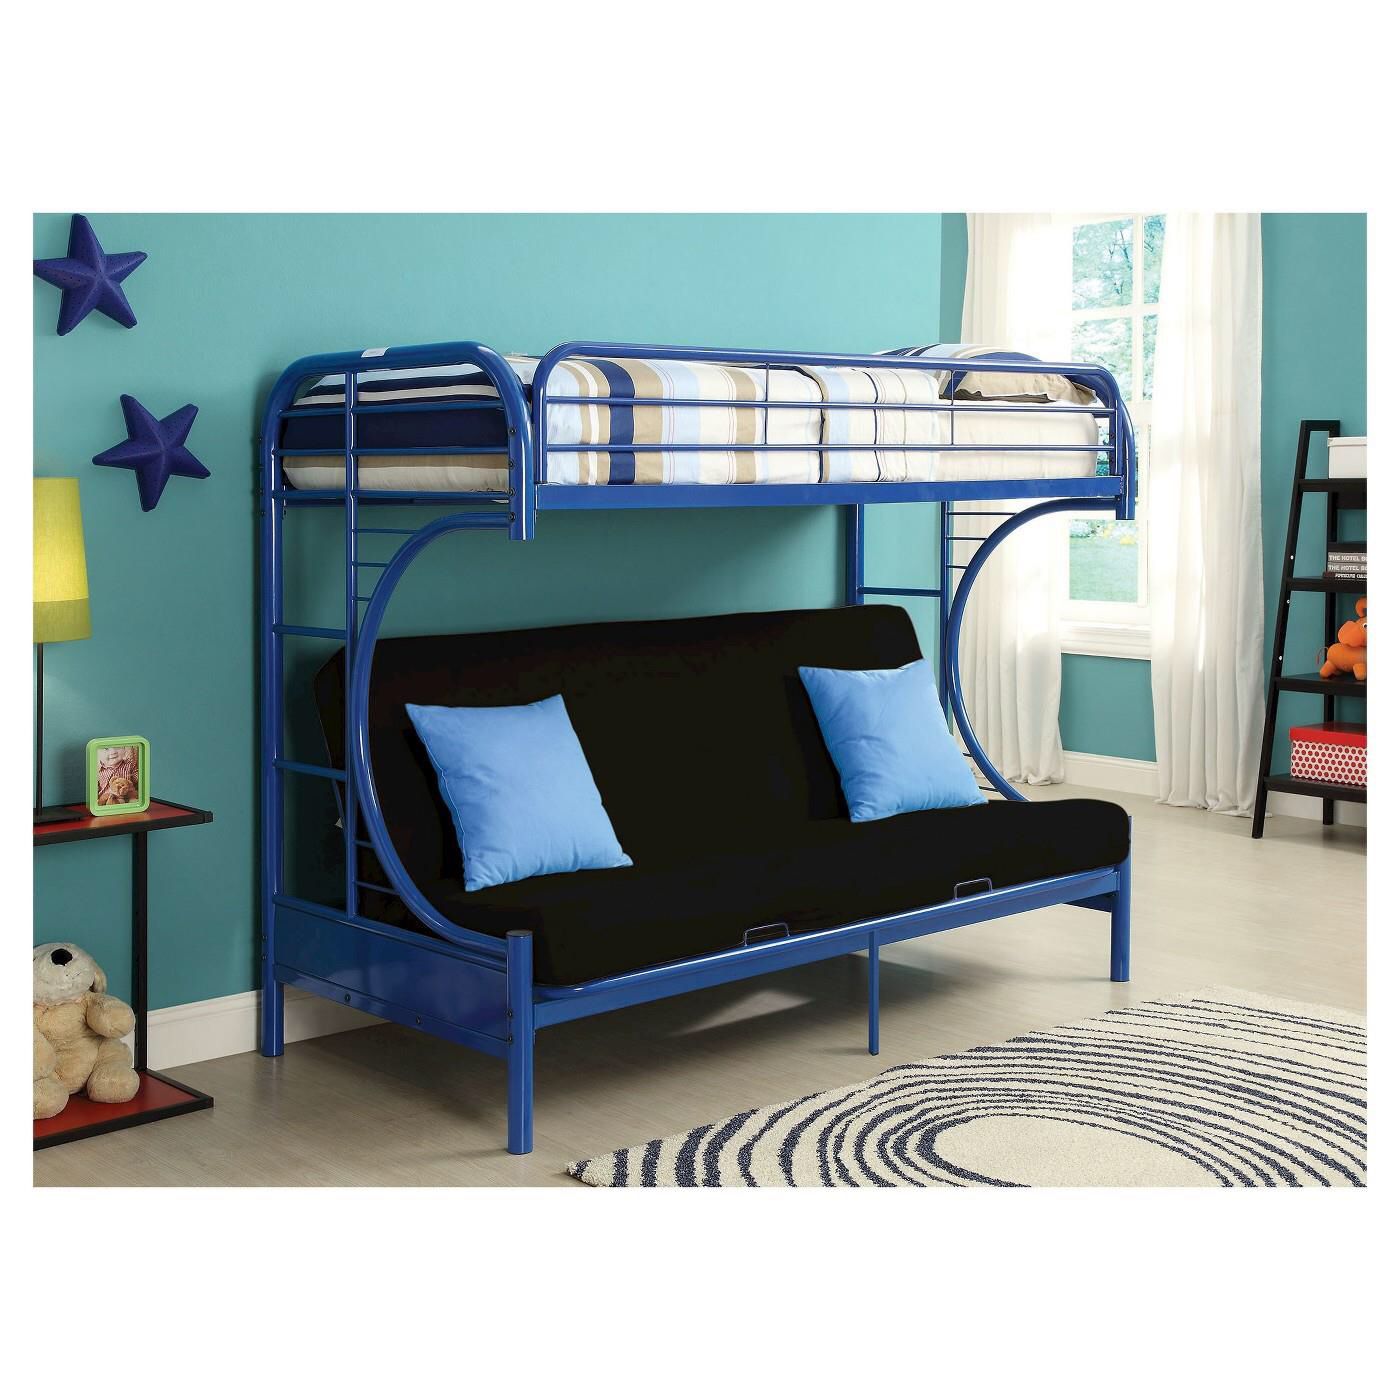 💥Furniture Sale💥 Blue Twin Futon Bunkbed Brand New In Box! $50 Down Takes It Home Today!